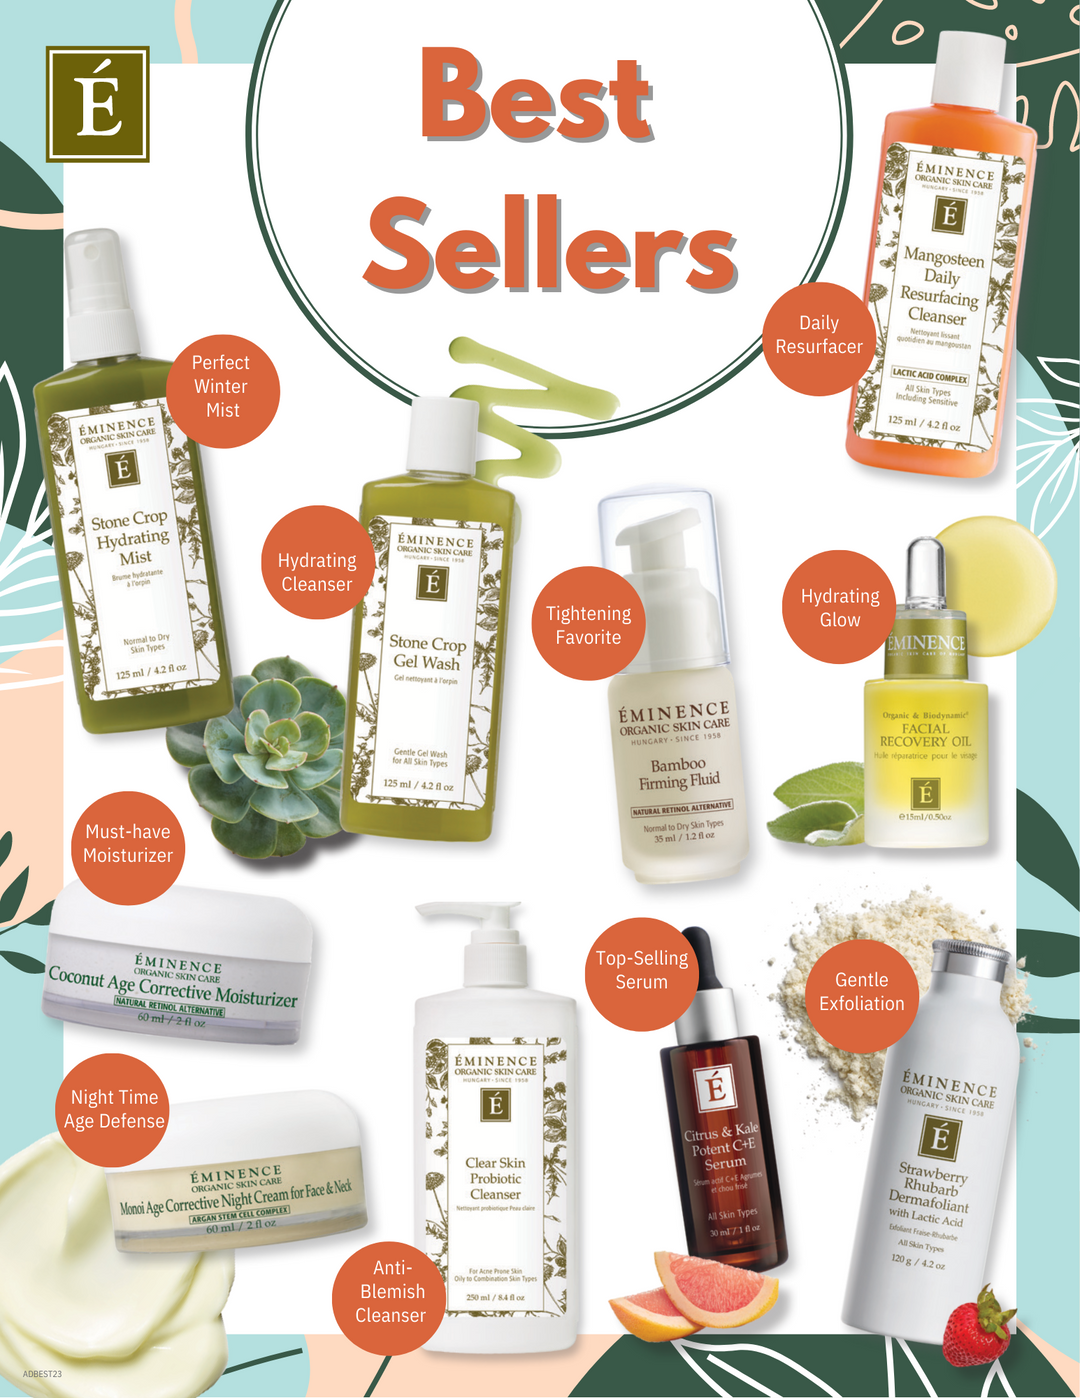 The Beloved Best Sellers You Need To Try From Eminence Organics